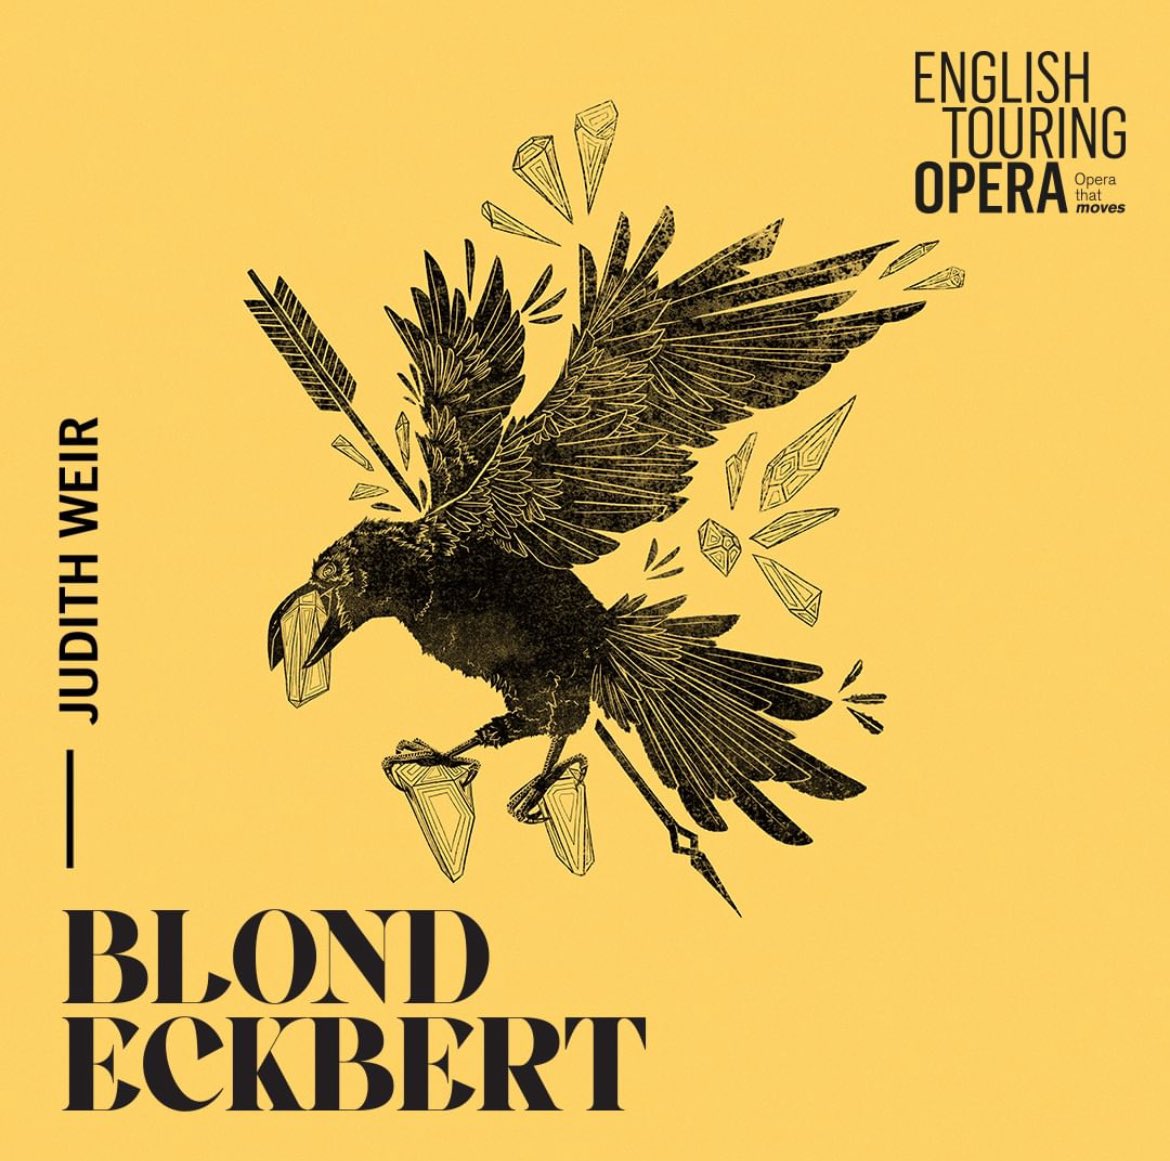 New year, new season! This spring, we’re touring two theatre-based productions and one children’s opera, as well as performing at Aldeburgh Festival of Music and the Arts💪❤️ Join us for some incredible opera in 2024: englishtouringopera.org.uk/whats-on